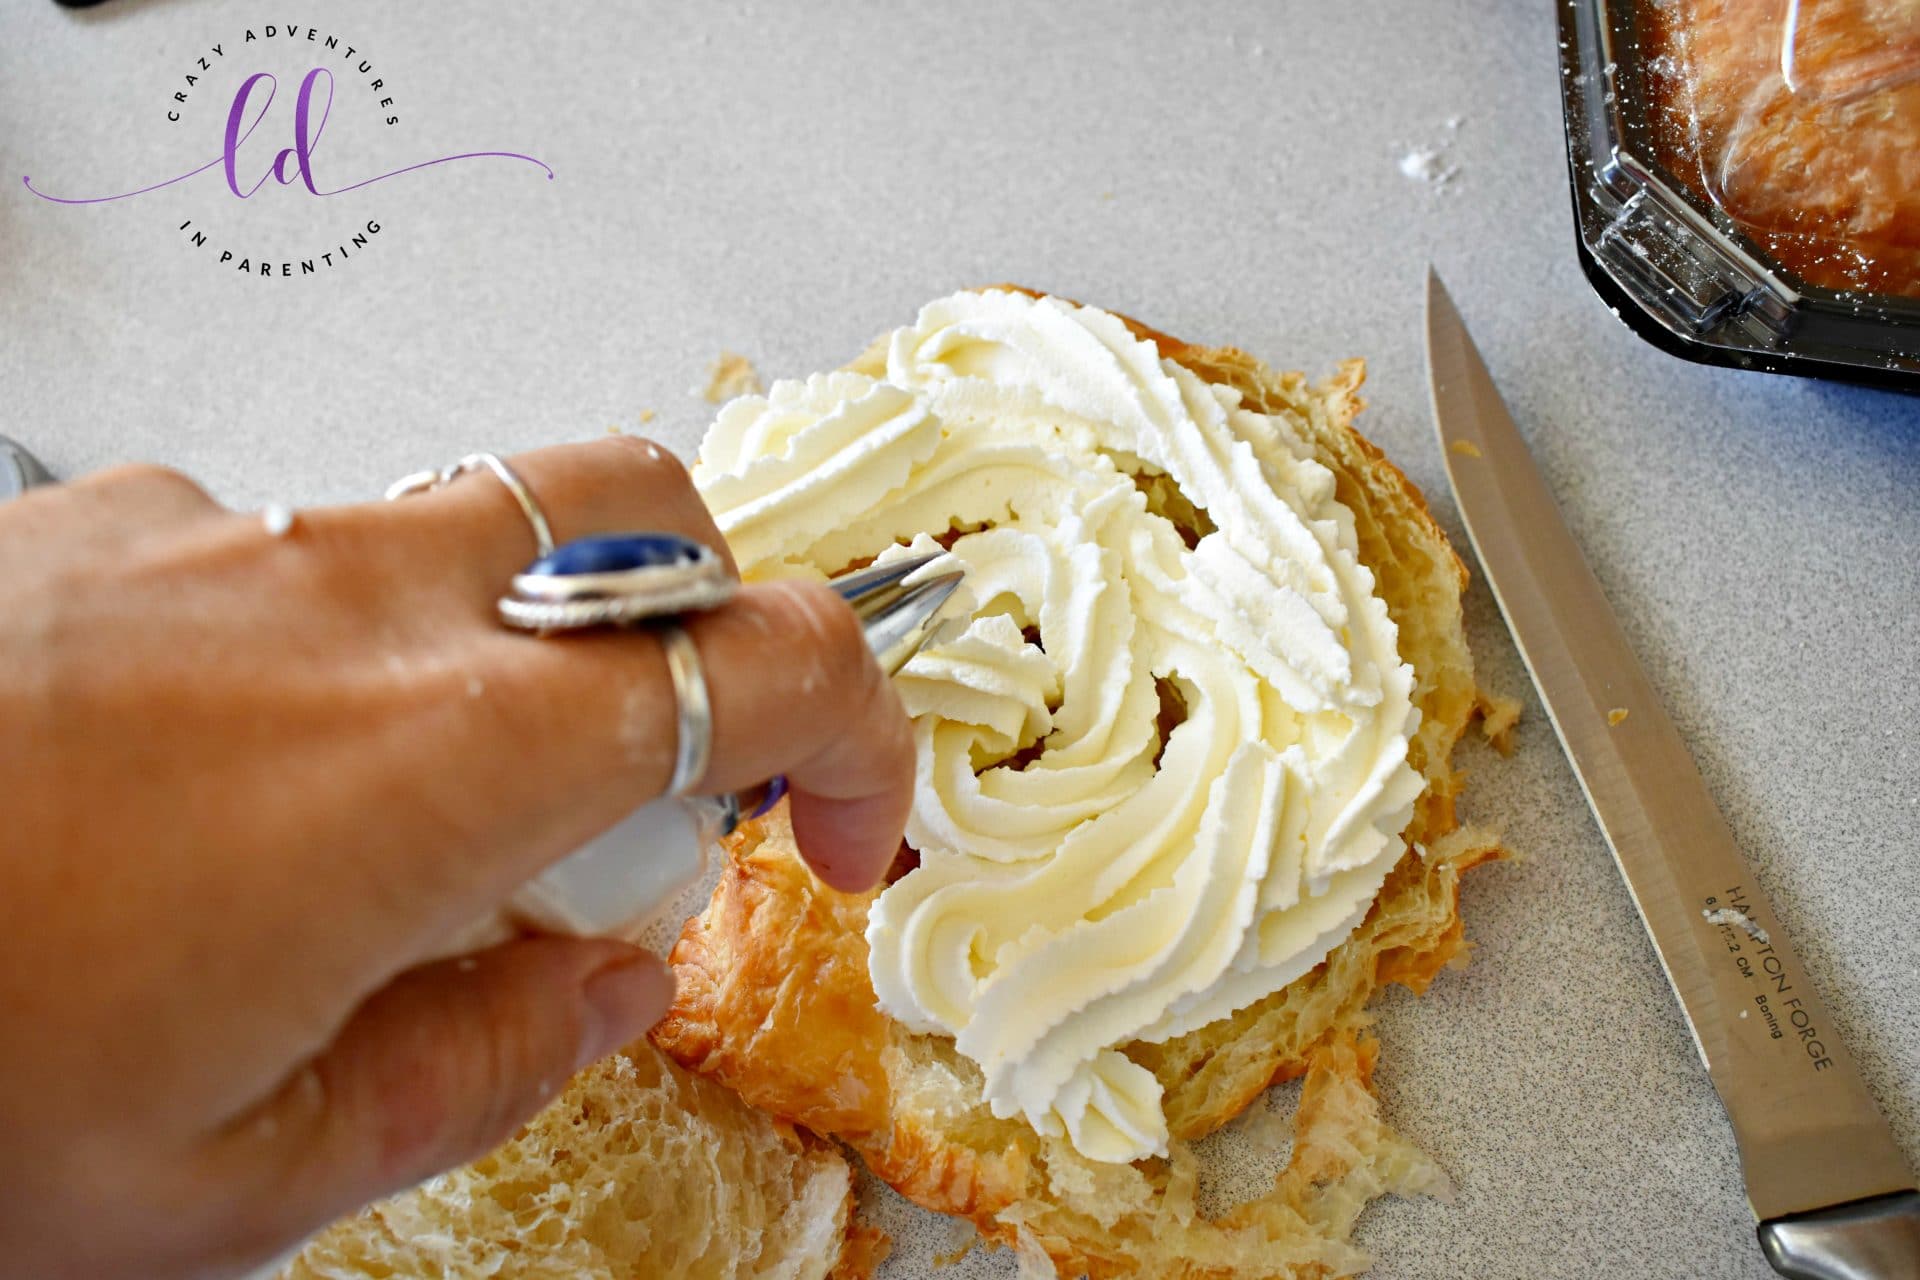 Piping homemade whipped cream into the Strawberry Shortcake Croissant